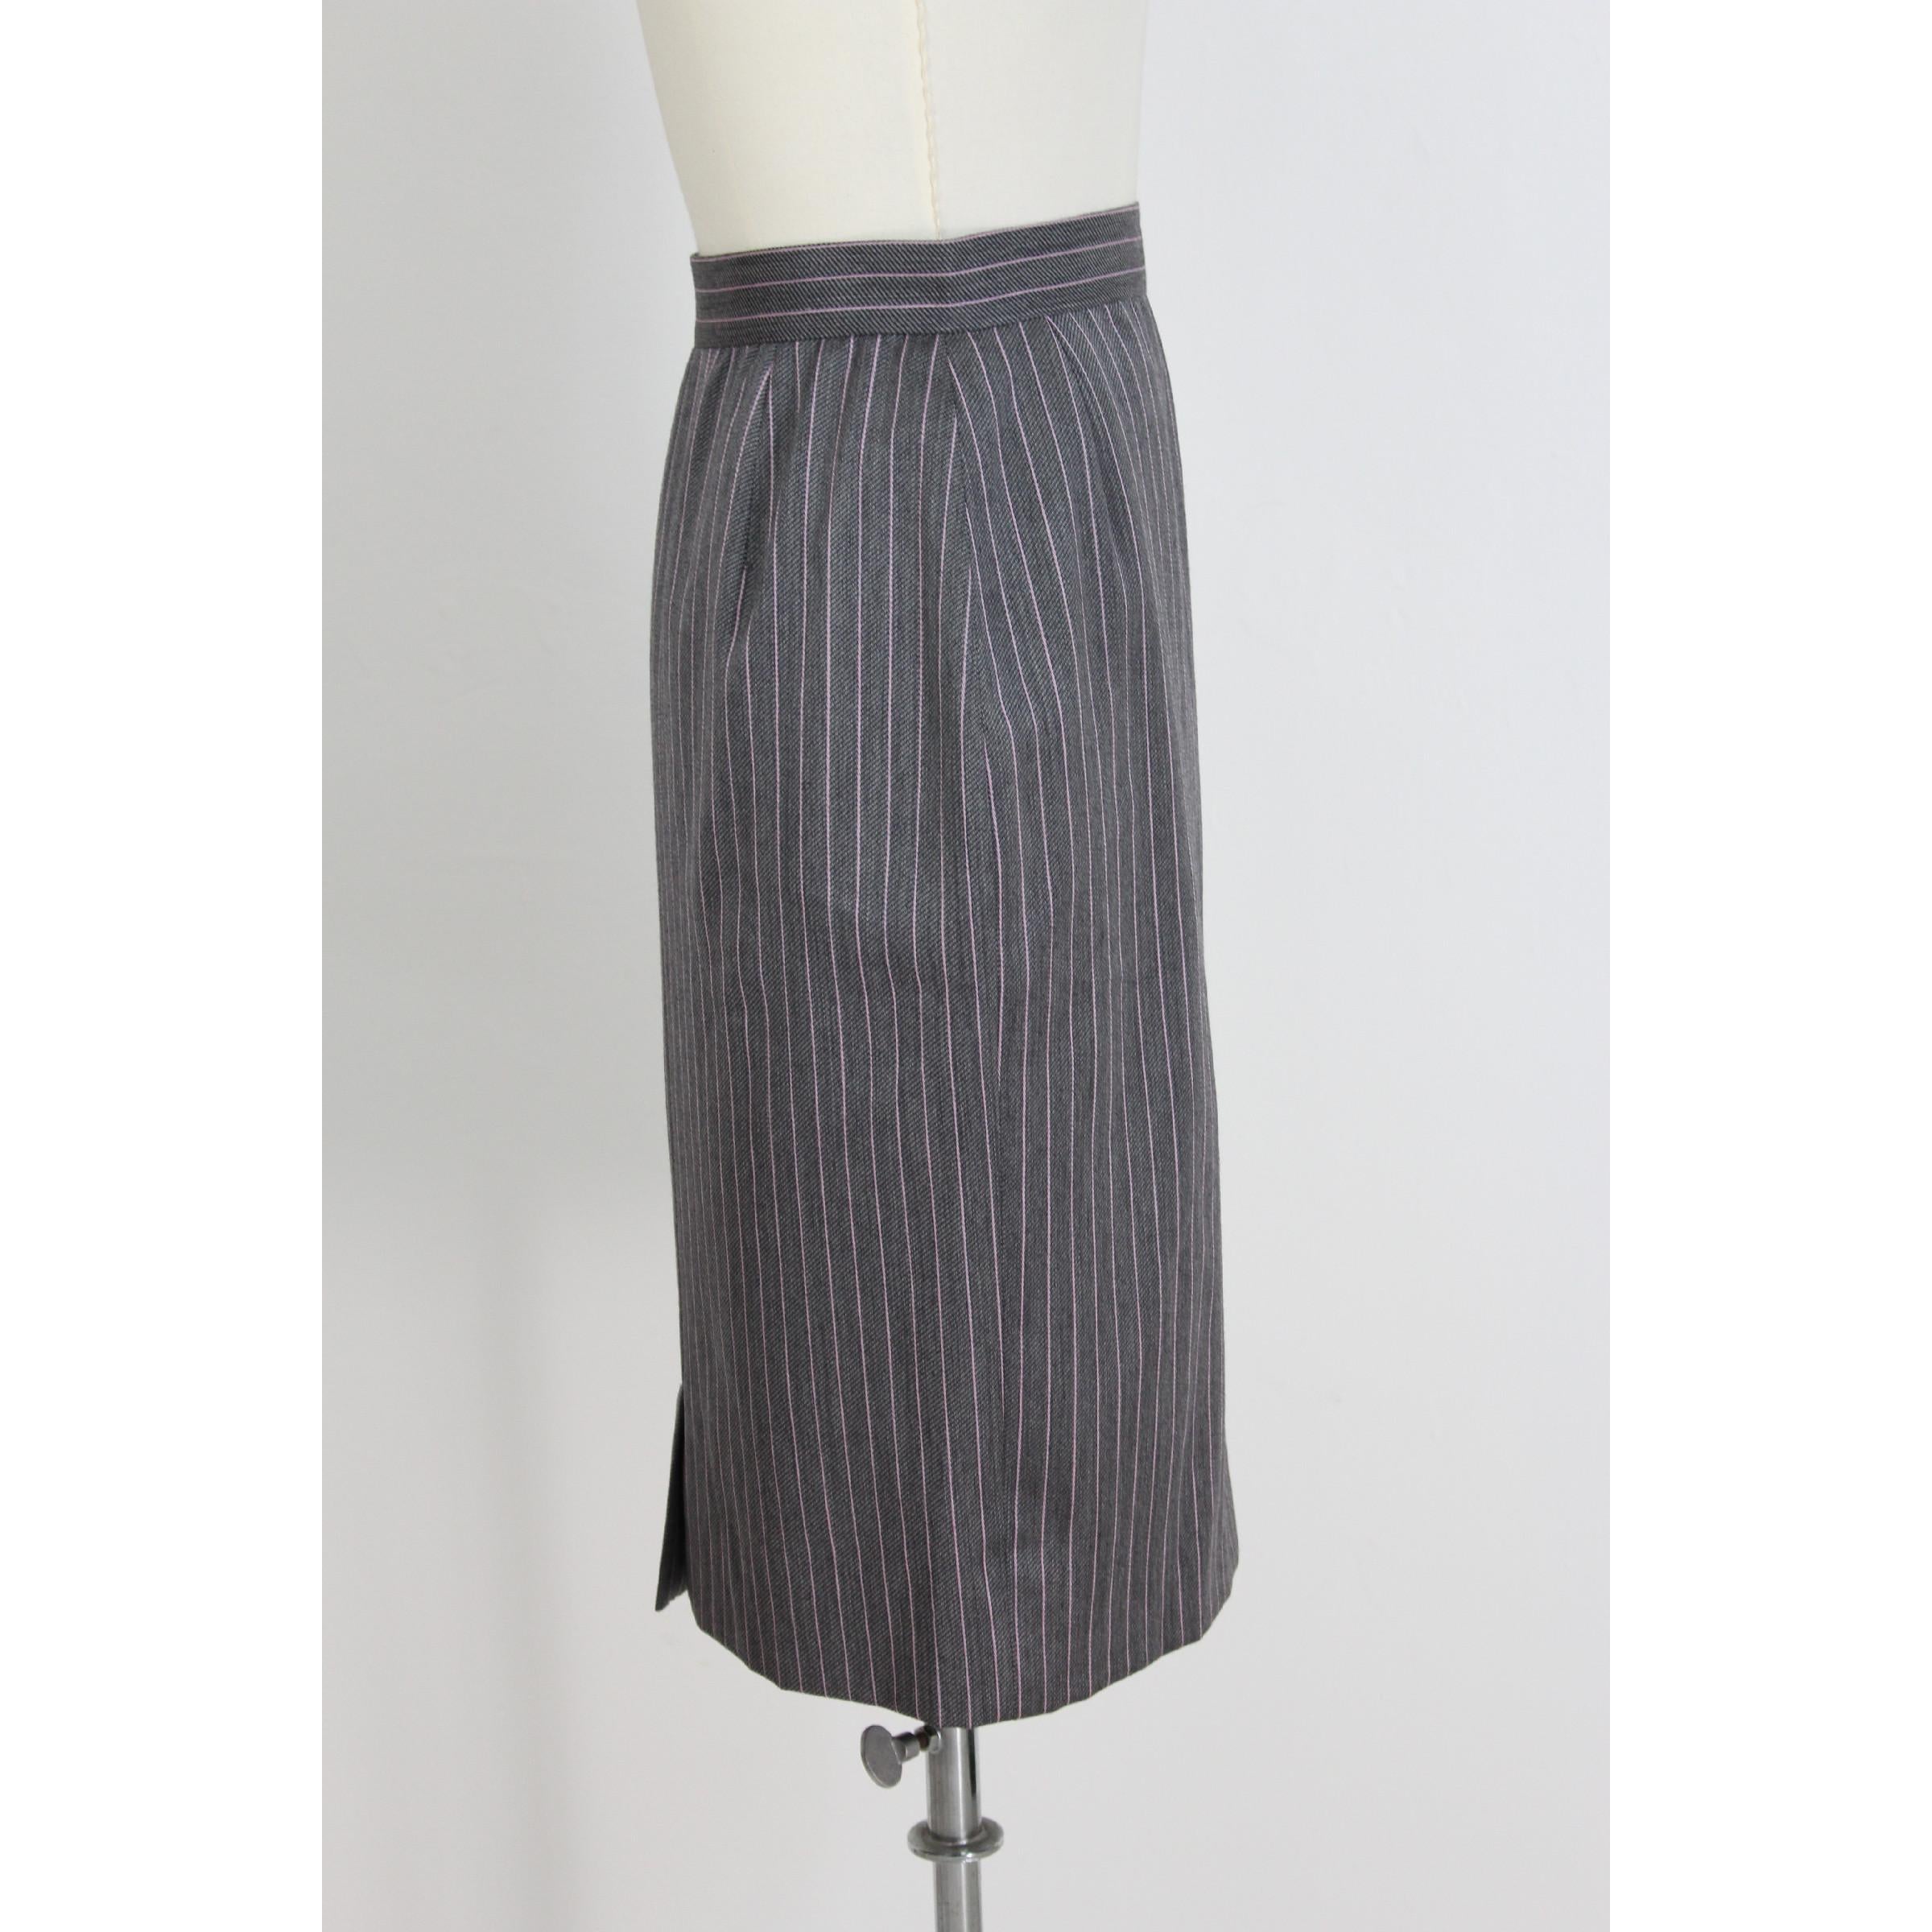 Mila Schon Wool Gray Pinstripe Classic Pencil Skirt In New Condition For Sale In Brindisi, Bt